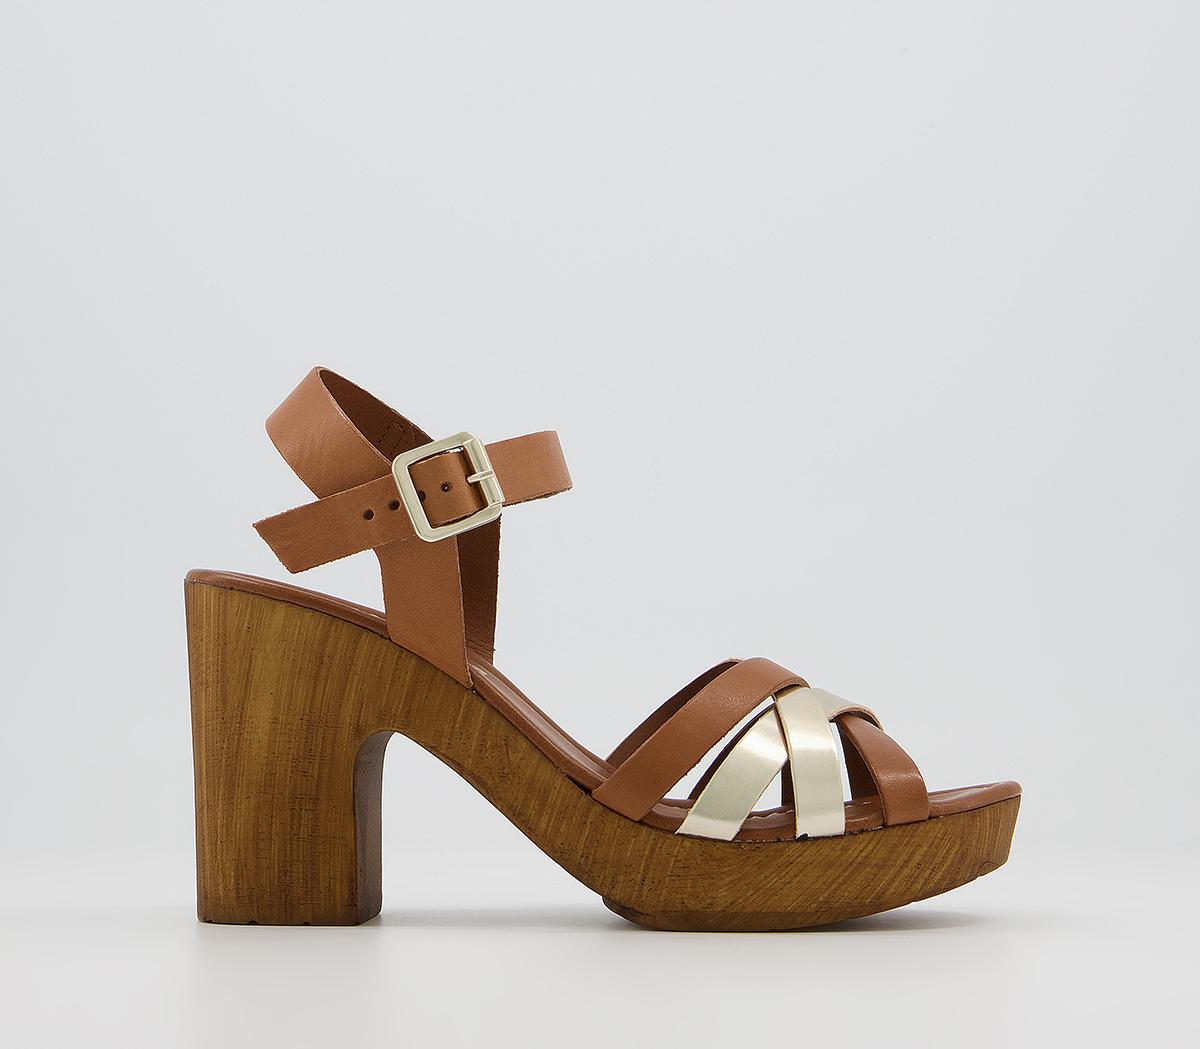 OFFICEMeagan Strappy Two Part Wood Block HeelsTan Gold Leather Mix